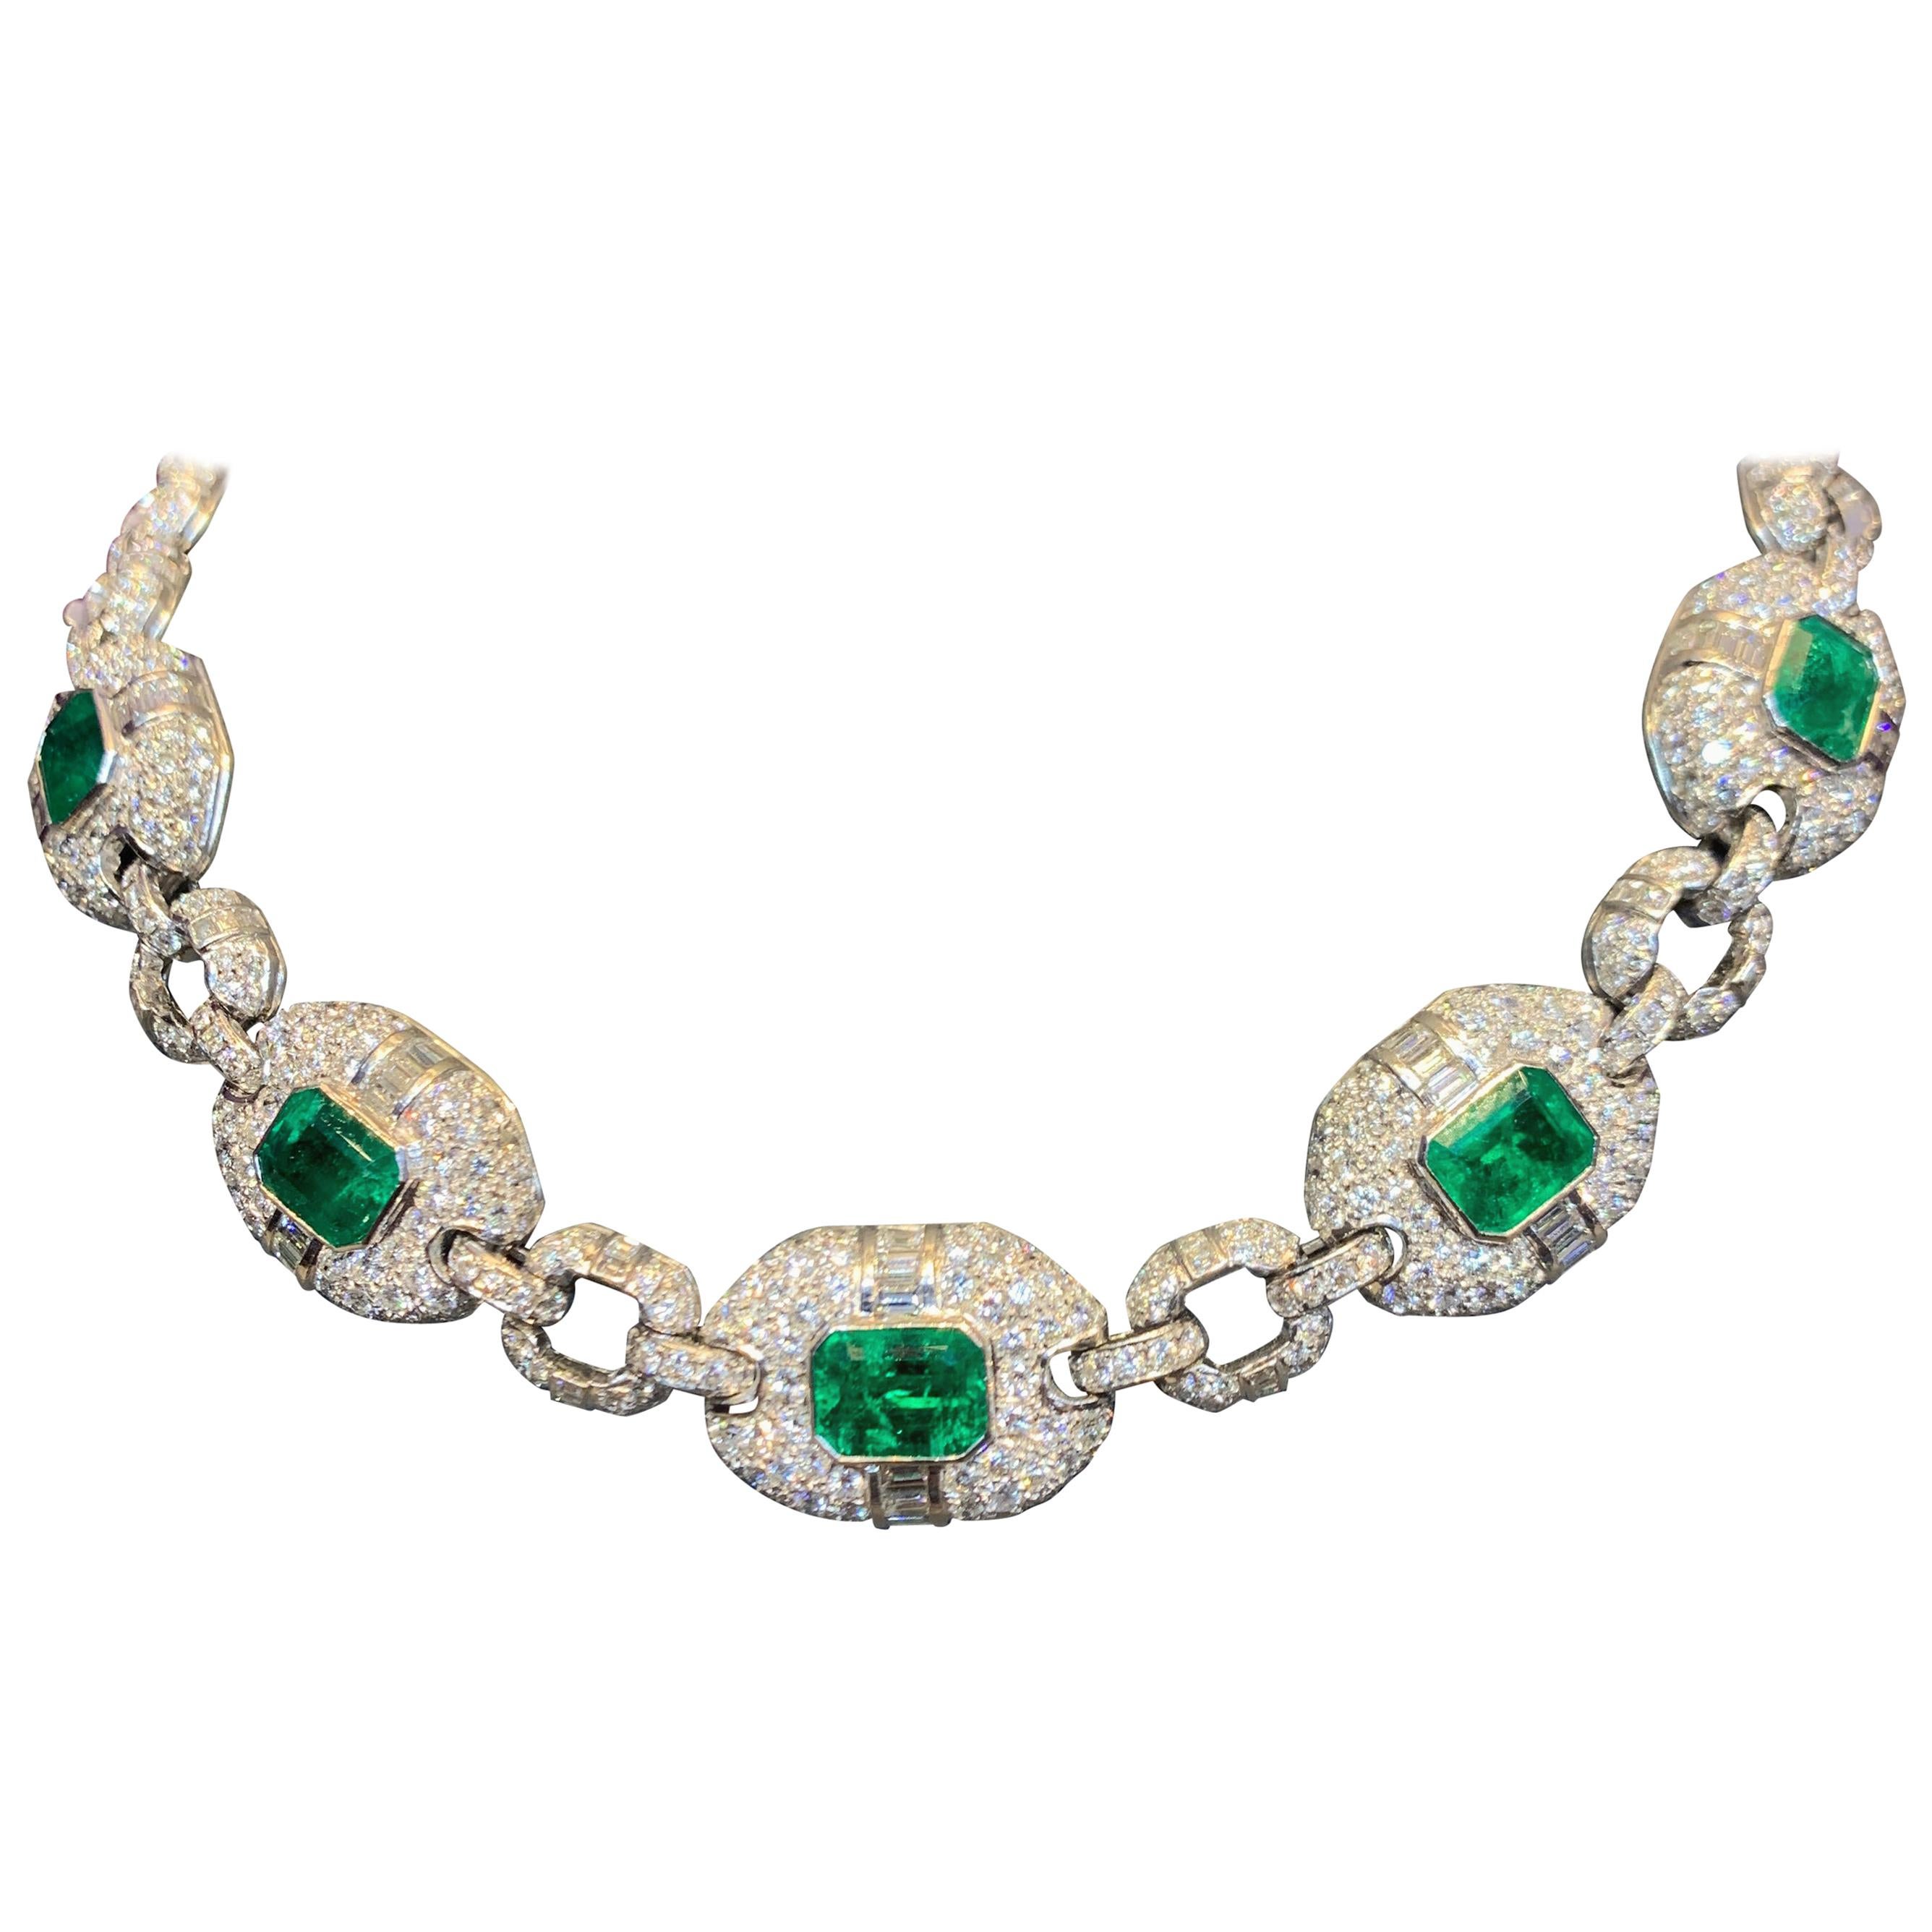 Emerald Cut Certified Colombian Emerald and Diamond Necklace